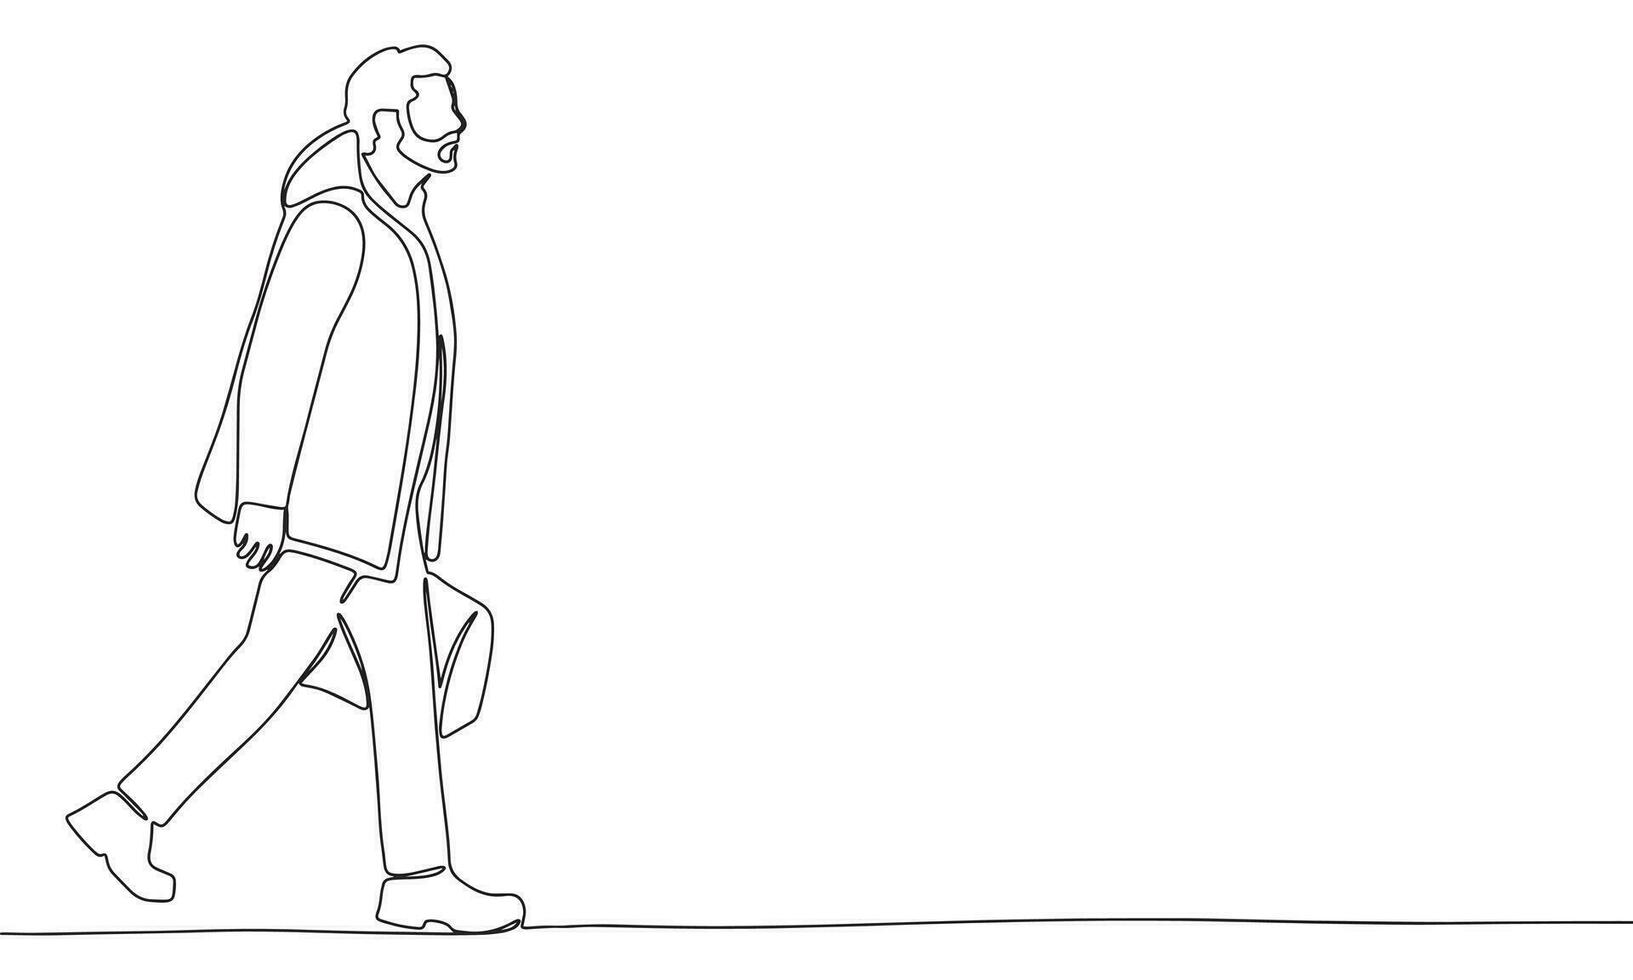 Man is going one line continuous. Line art concept man banner. Outline vector illustration.